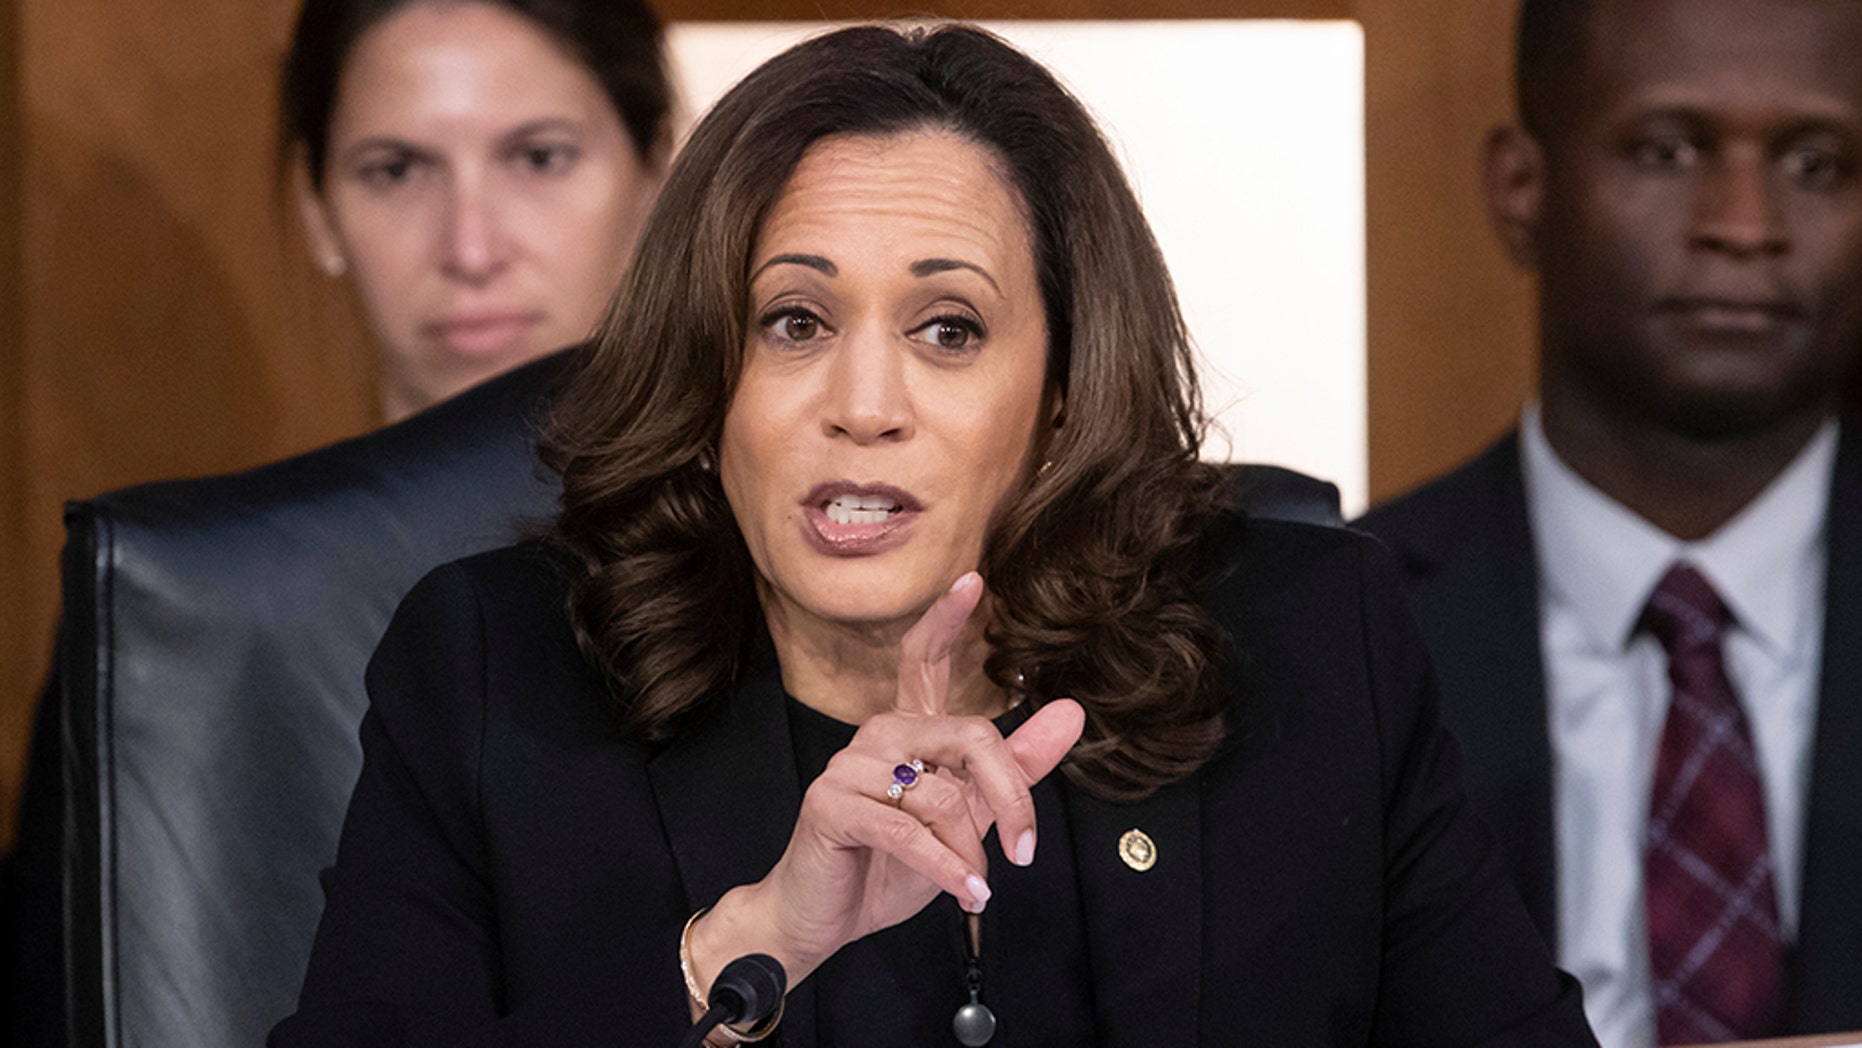 Seen as a potential 2020 presidential contender, Sen. Kamala Harris, D-Calif., garnered attention during Brett Kavanaugh's initial confirmation hearing with her intense questioning. (Associated Press)